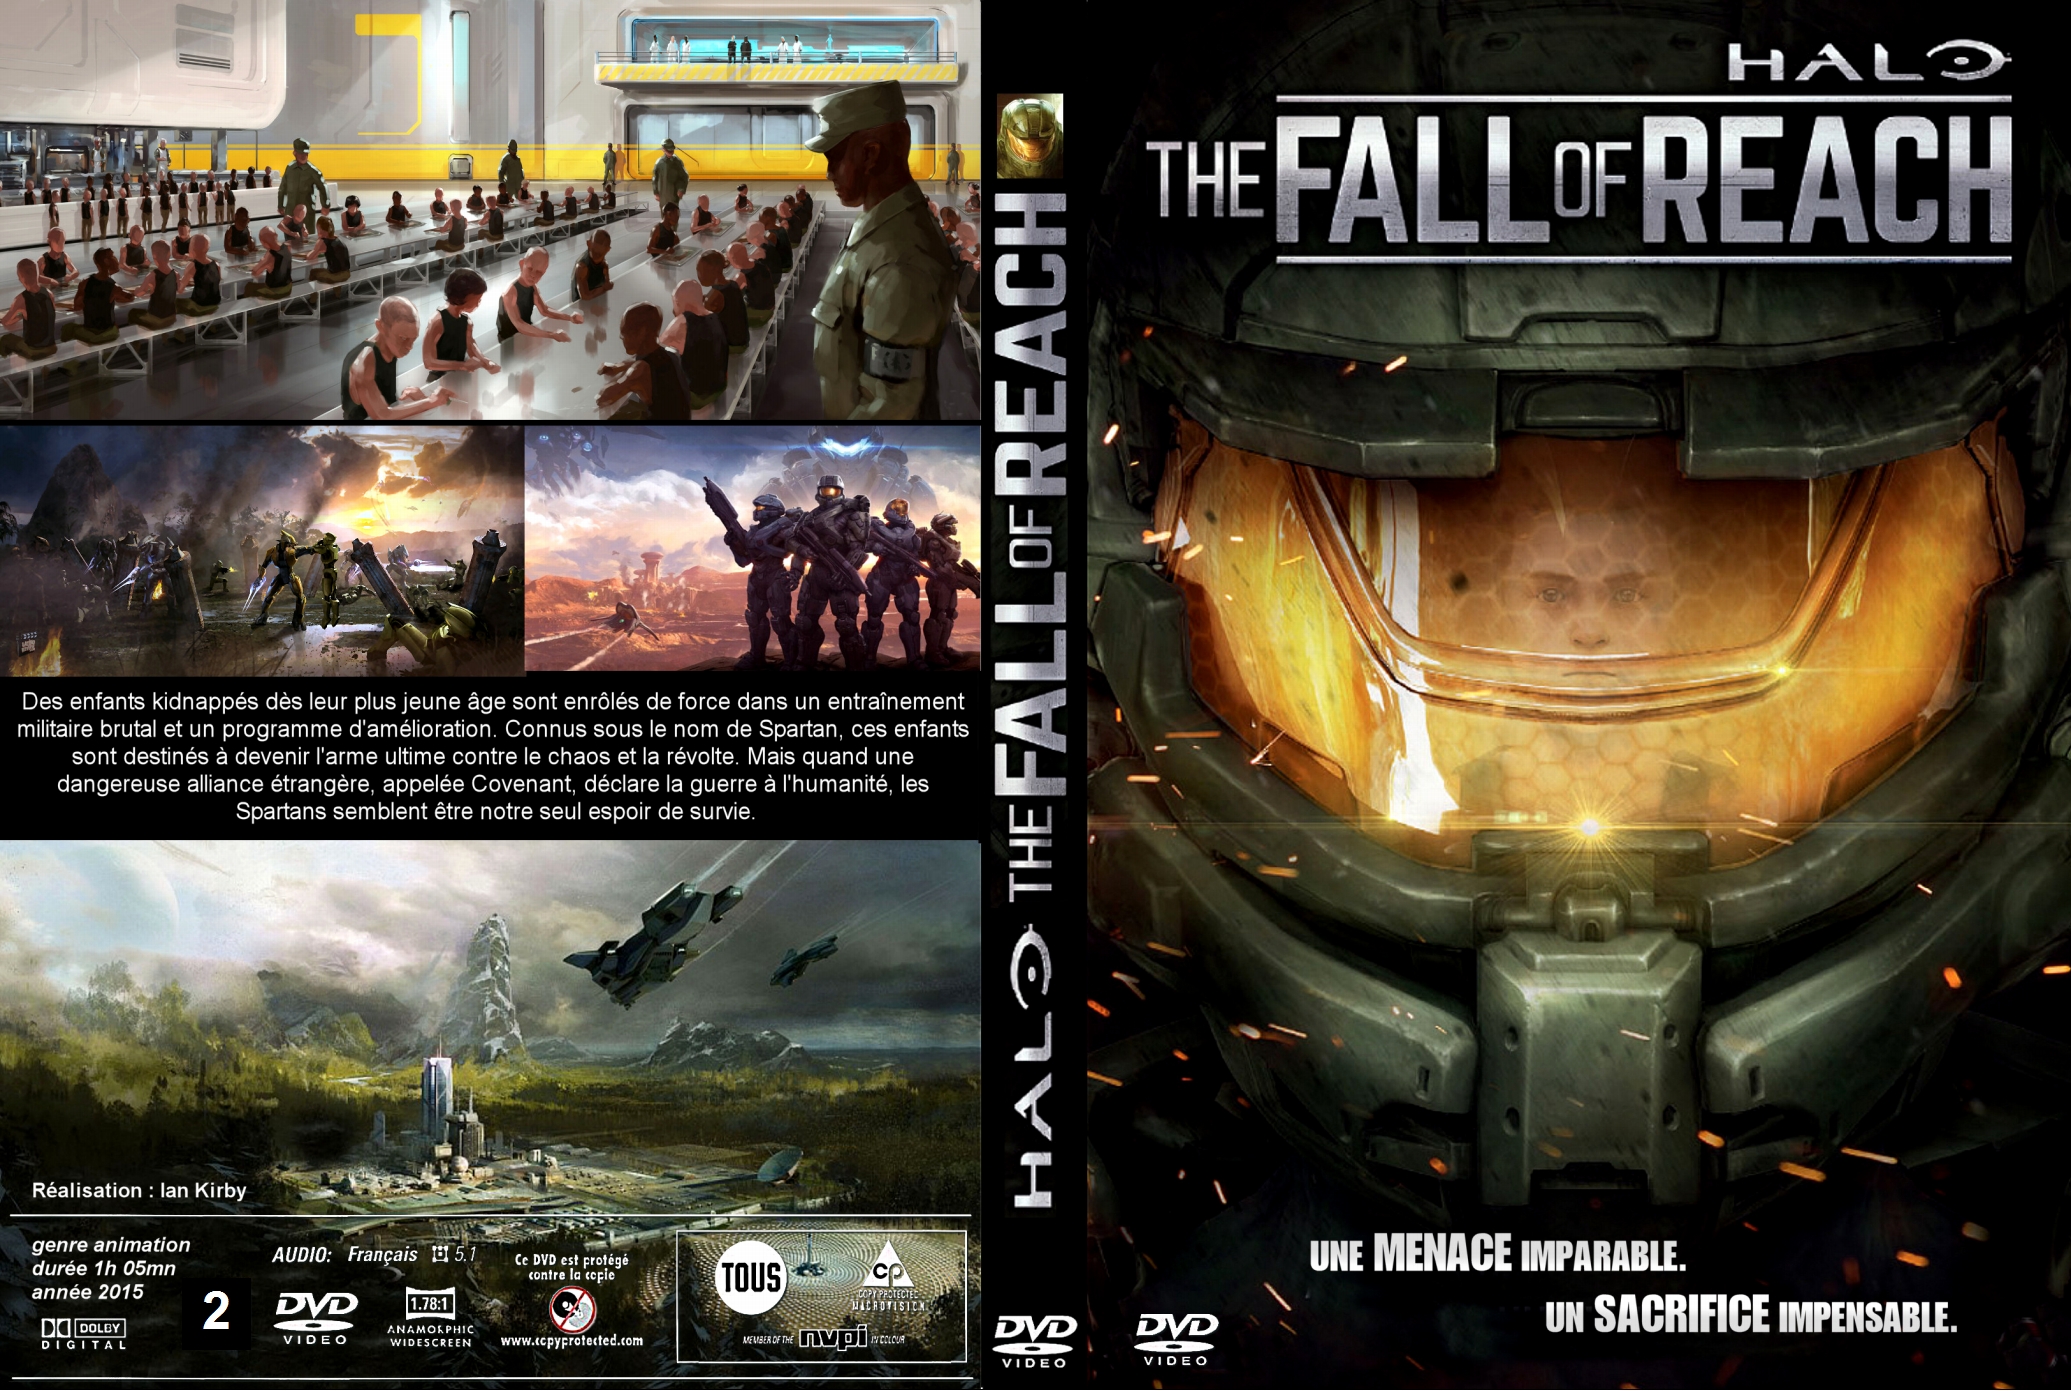 Jaquette DVD Halo - The Fall Of Reach custom